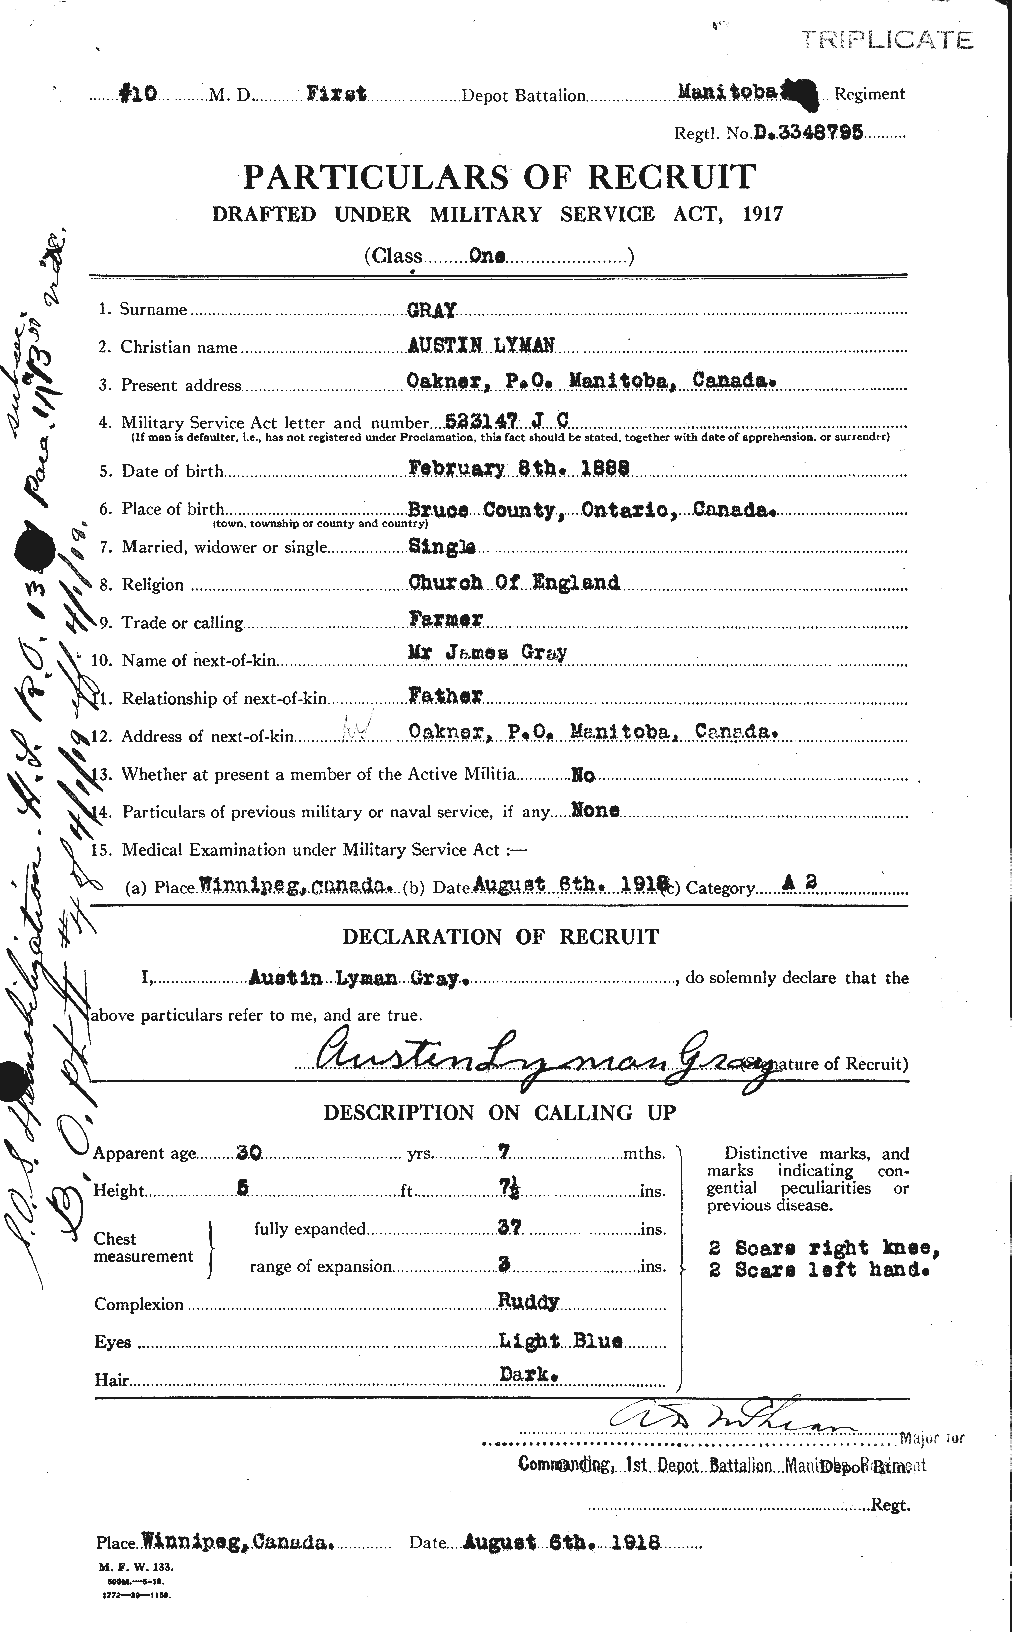 Personnel Records of the First World War - CEF 361393a